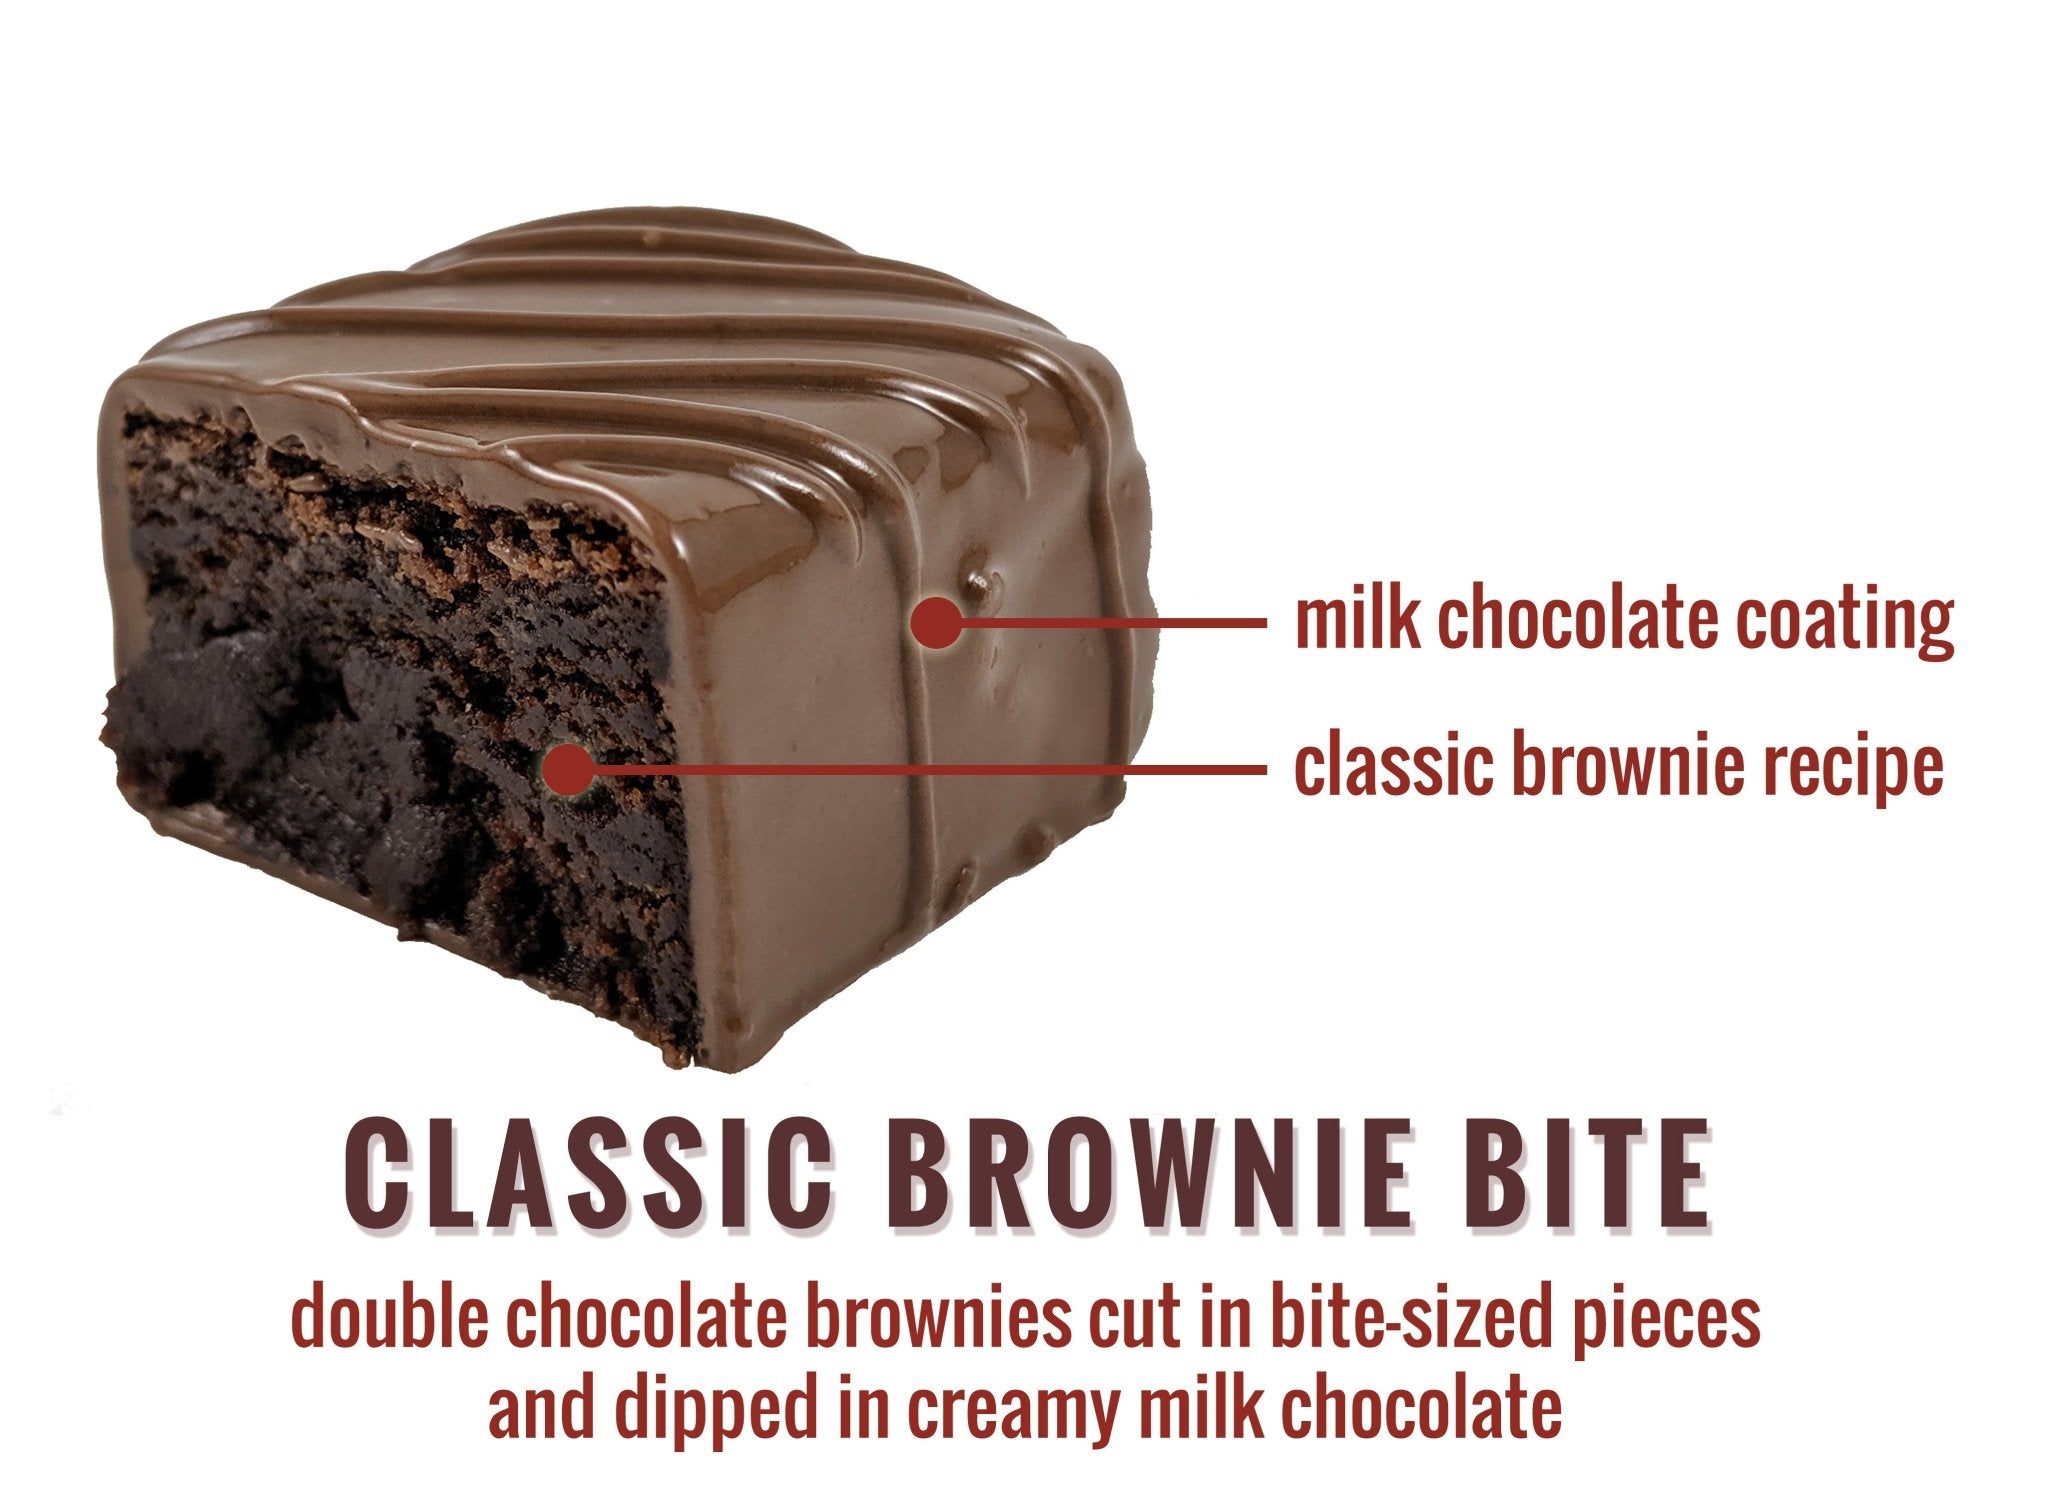 Indulgent Decadence: Crafting Irresistible Homemade Brownies from Scratch